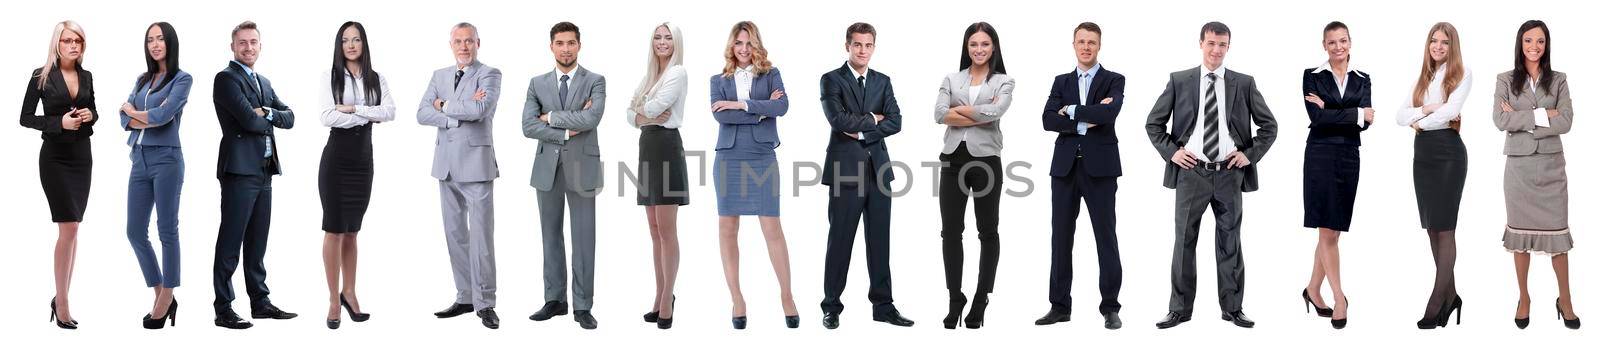 Group of smiling business people. Businessman and woman team. Isolated over white background.